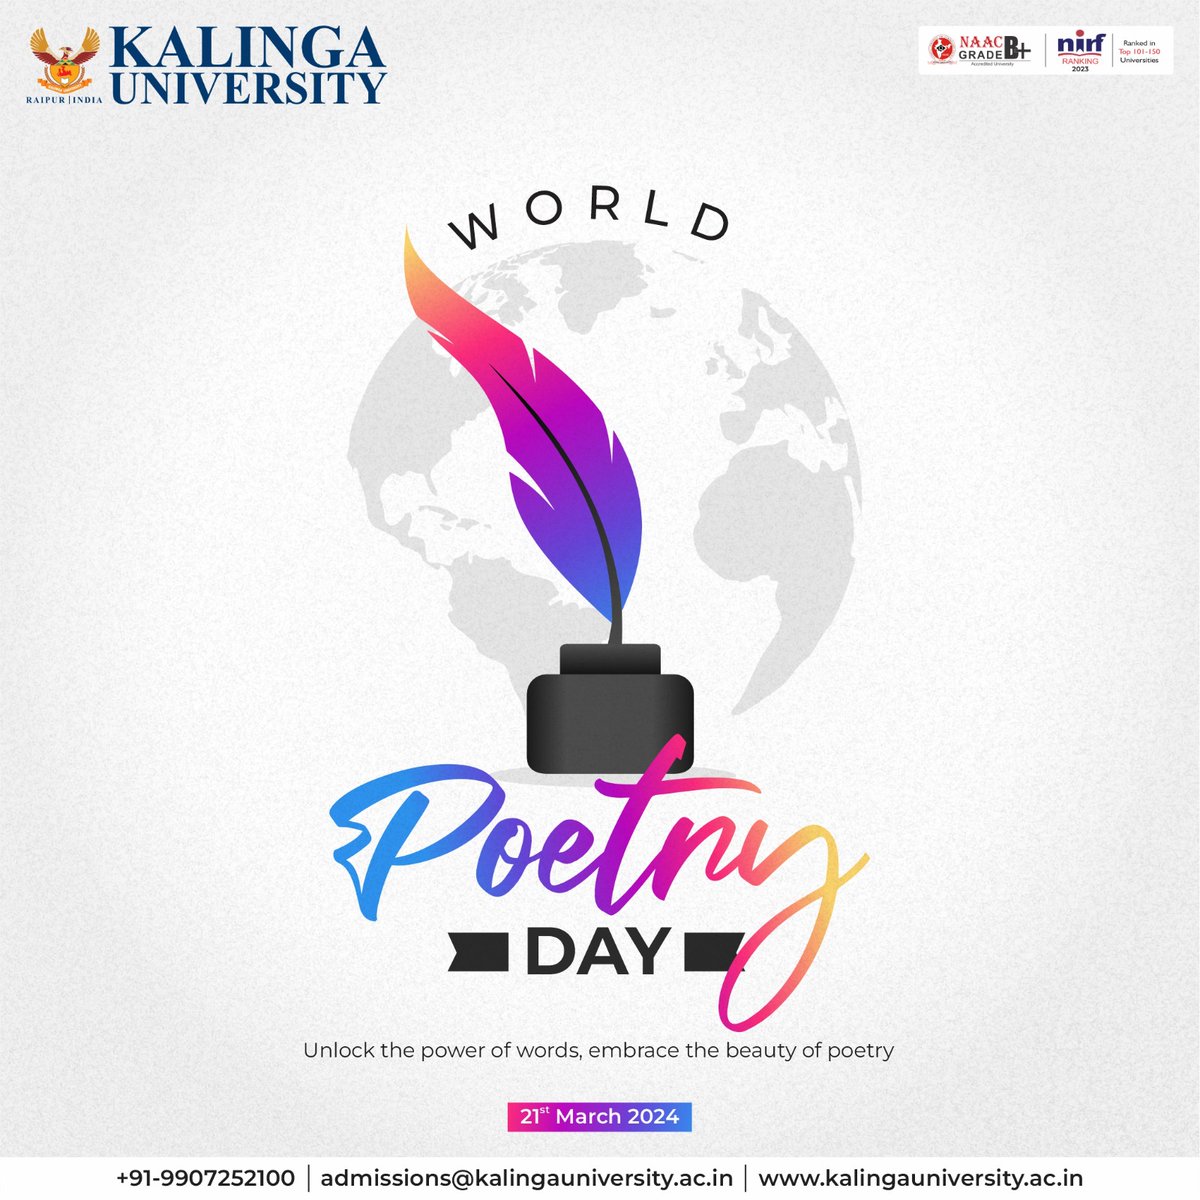 Embrace the rhythm of words and the magic of verse! Kalinga University wishes everyone a Happy Poetry Day! Let your creativity flow and your imagination soar as we celebrate the beauty of language and the power of poetry. #WorldPoetryDay #KalingaUniversity #WordsThatMatter